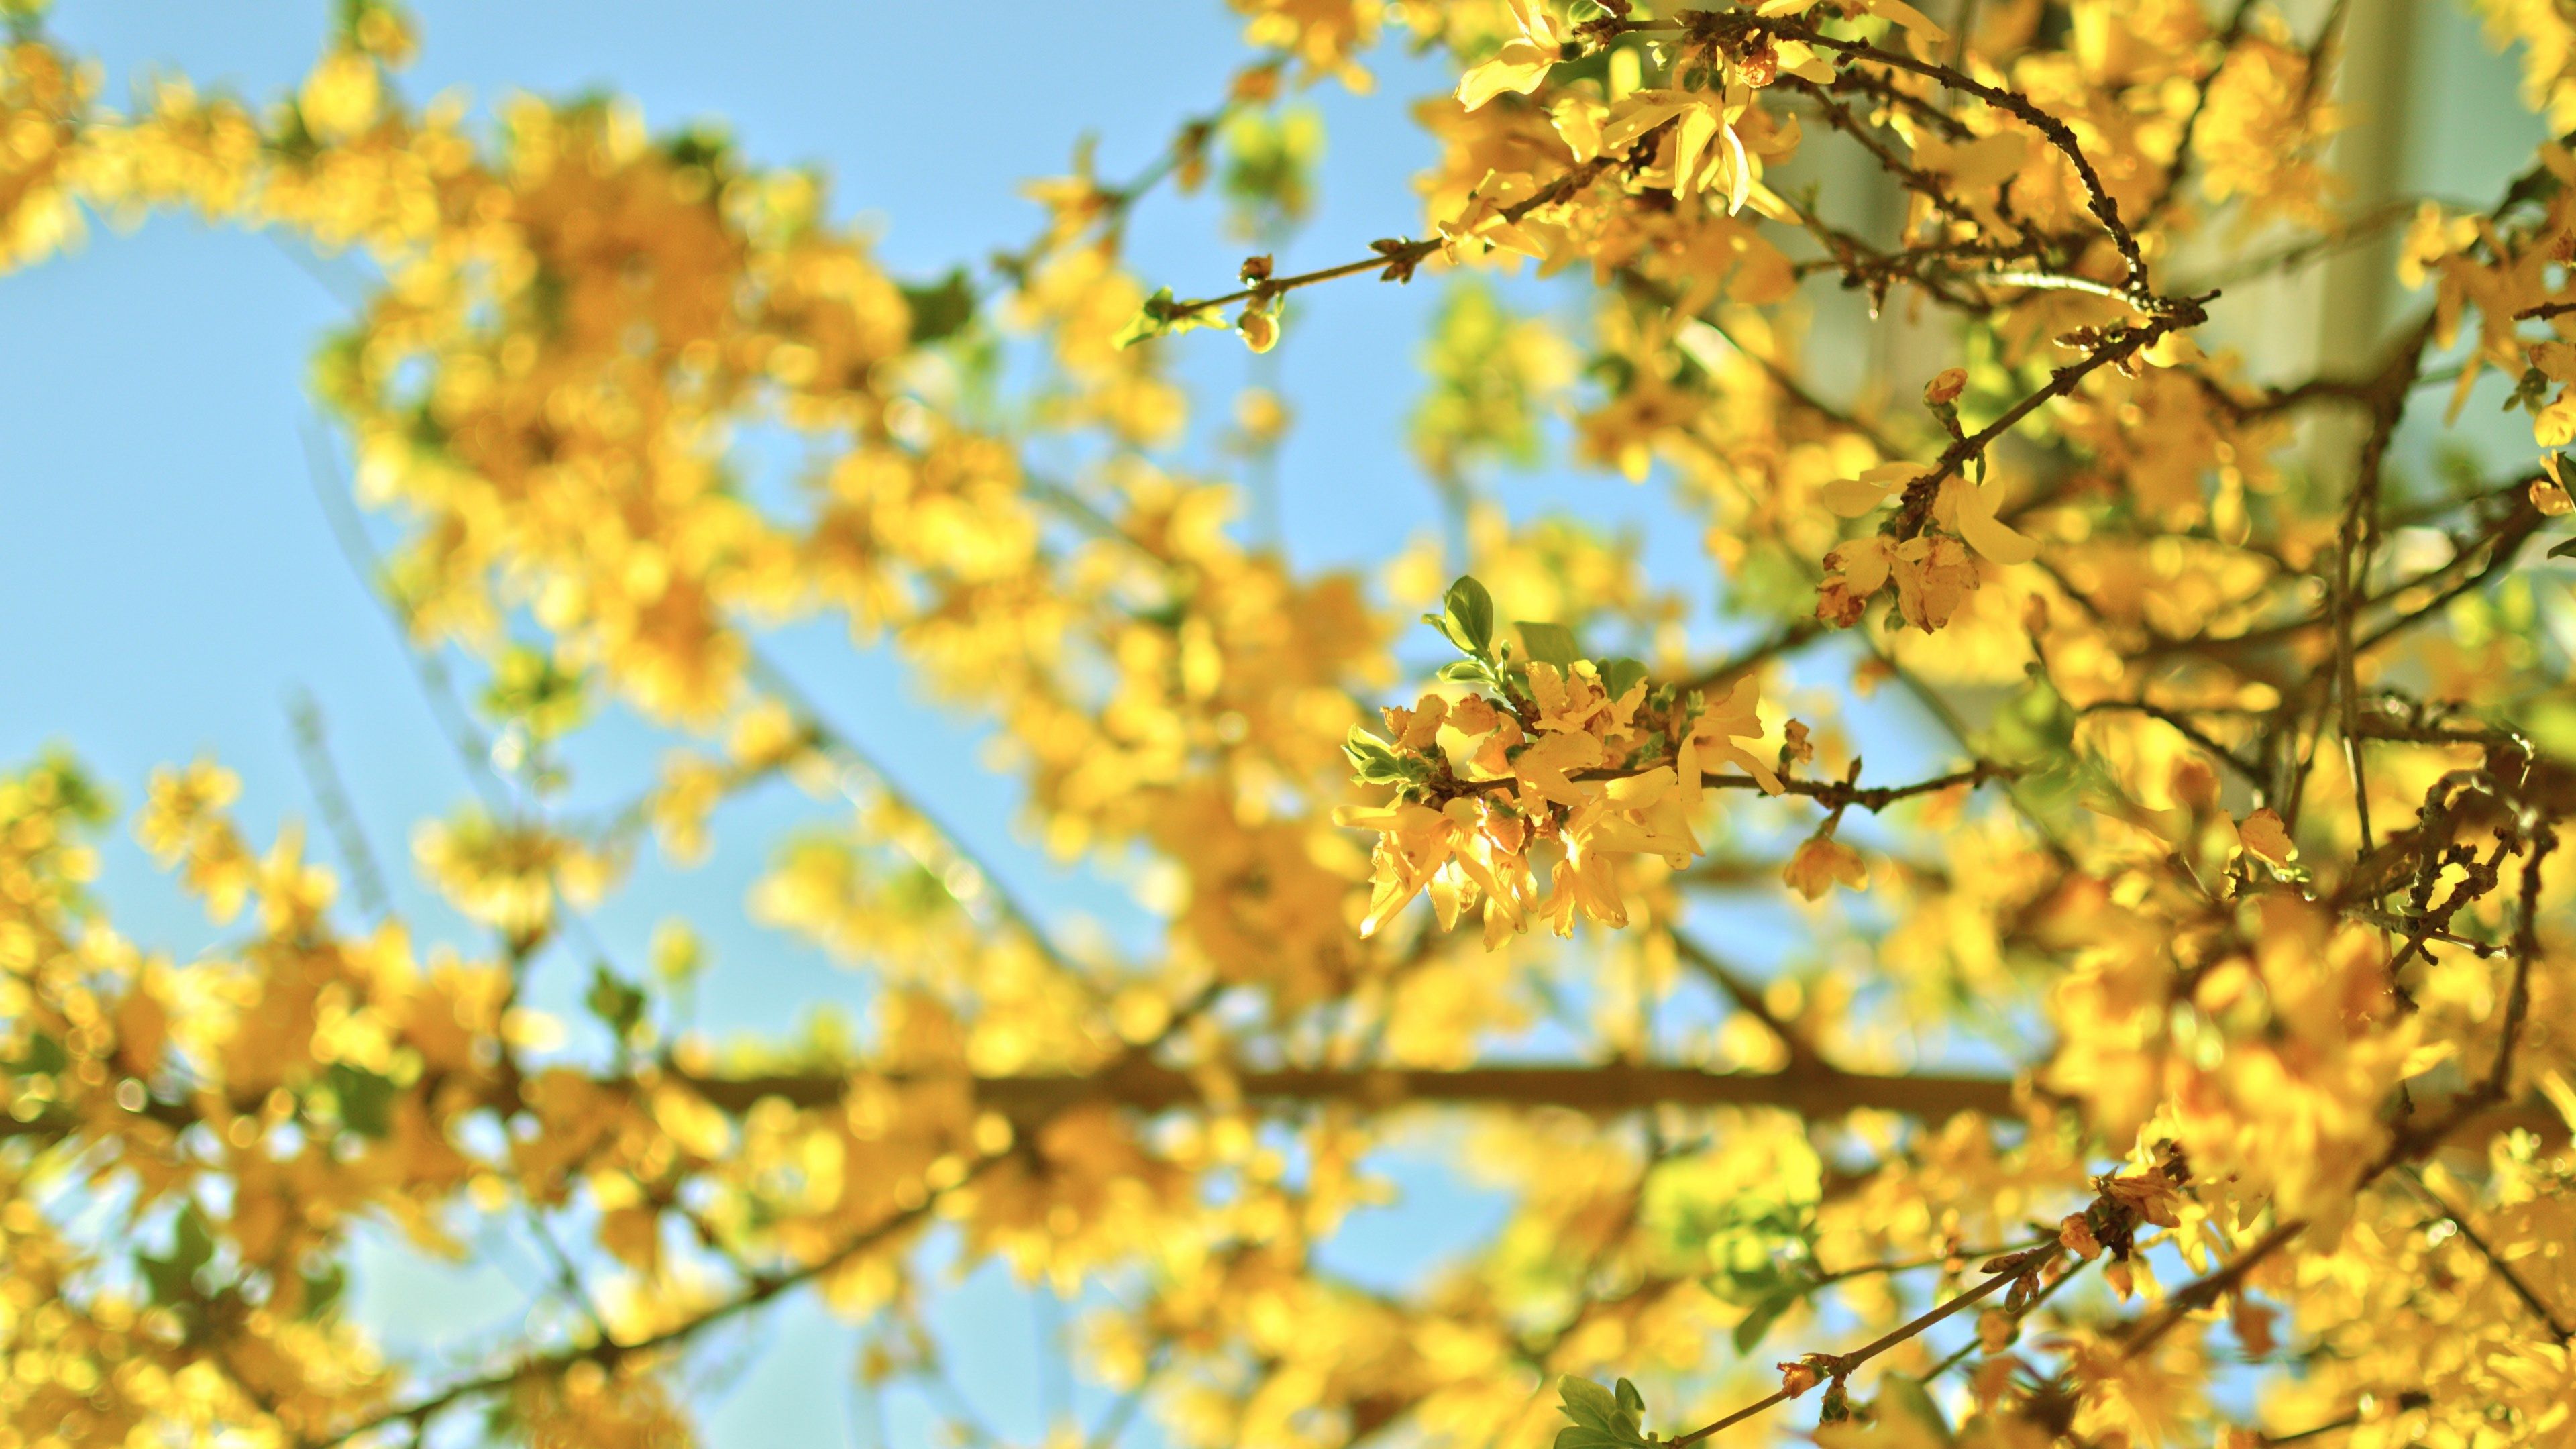 Wallpaper / a close up of branches covered with light yellow flowers in blossom, yellow blossom on branches 4k wallpaper free download